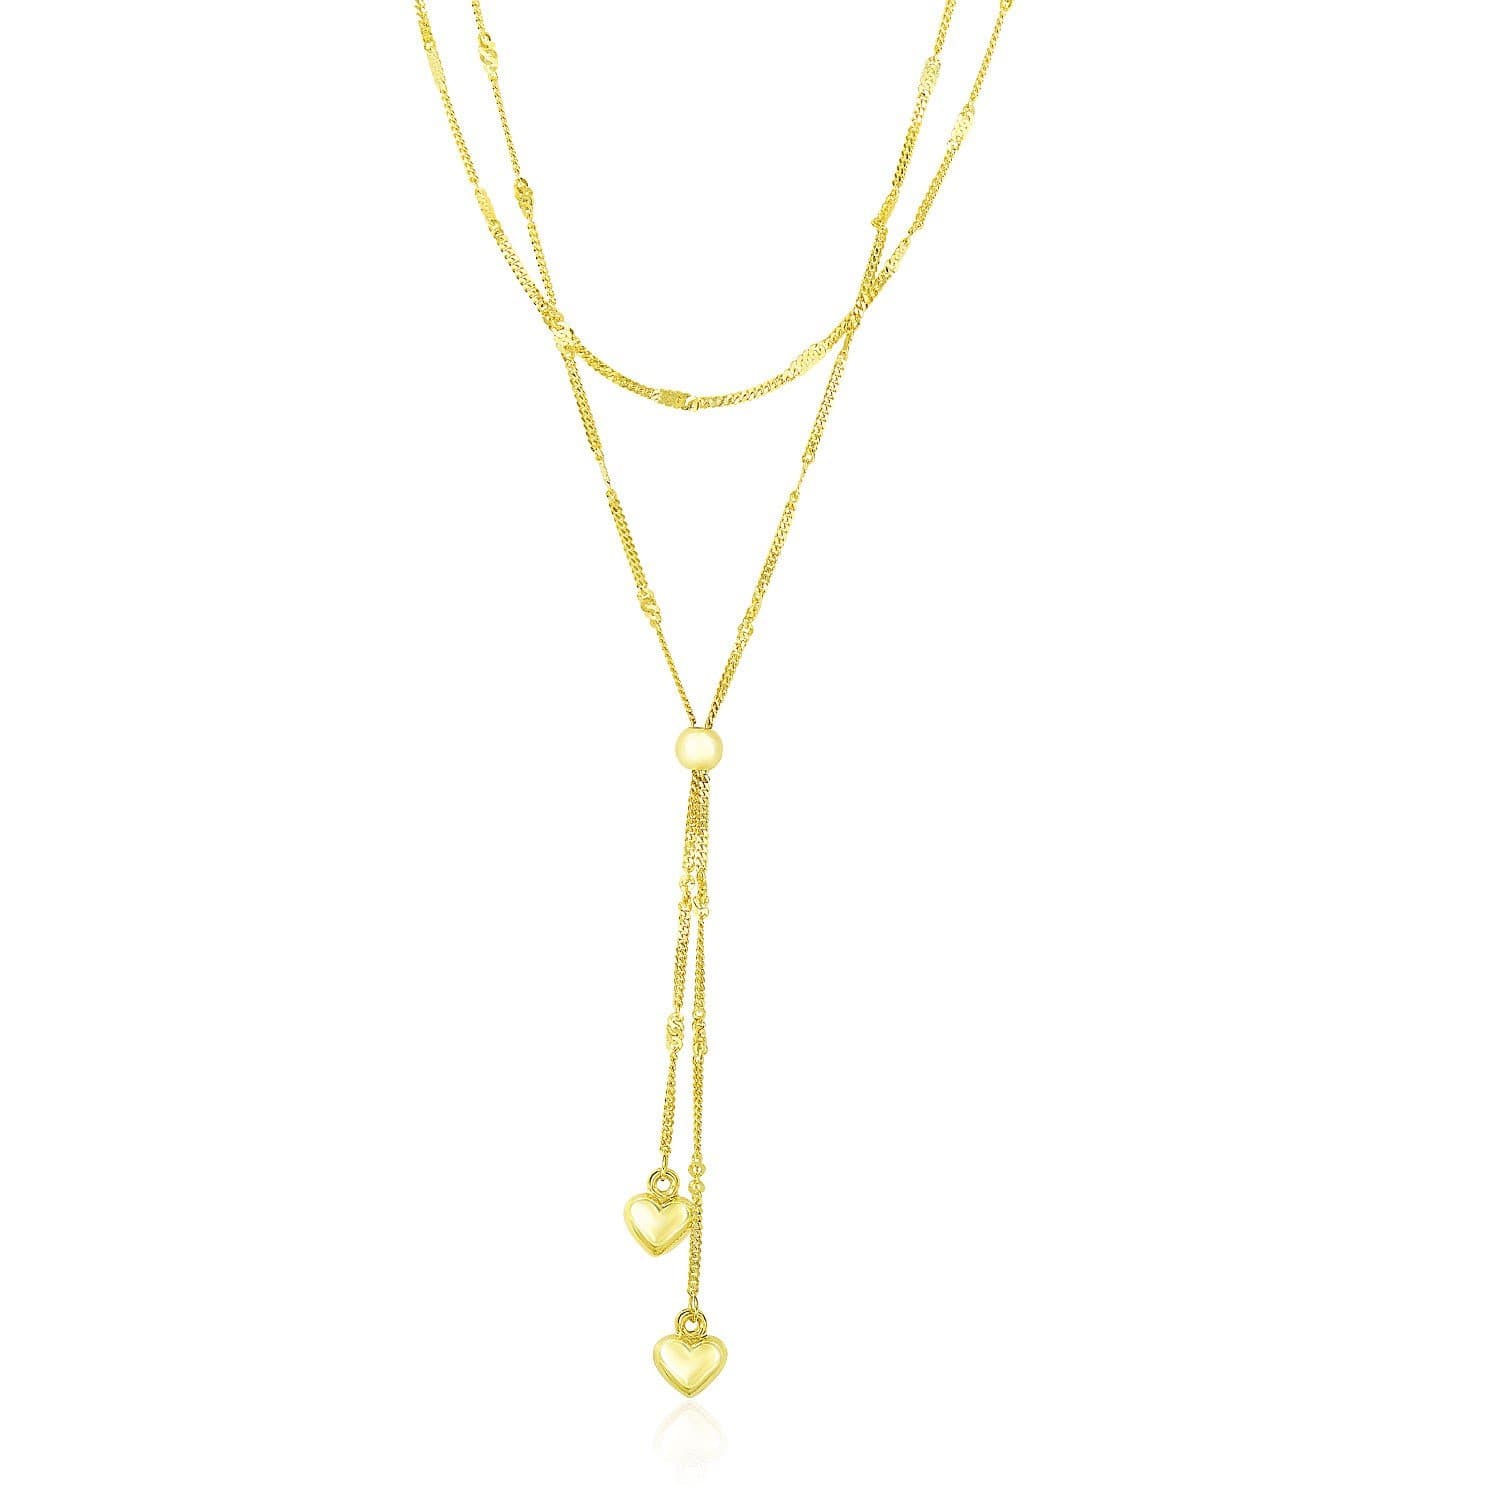 14k Yellow Gold Puffed Heart Lariat Double Strand Necklace